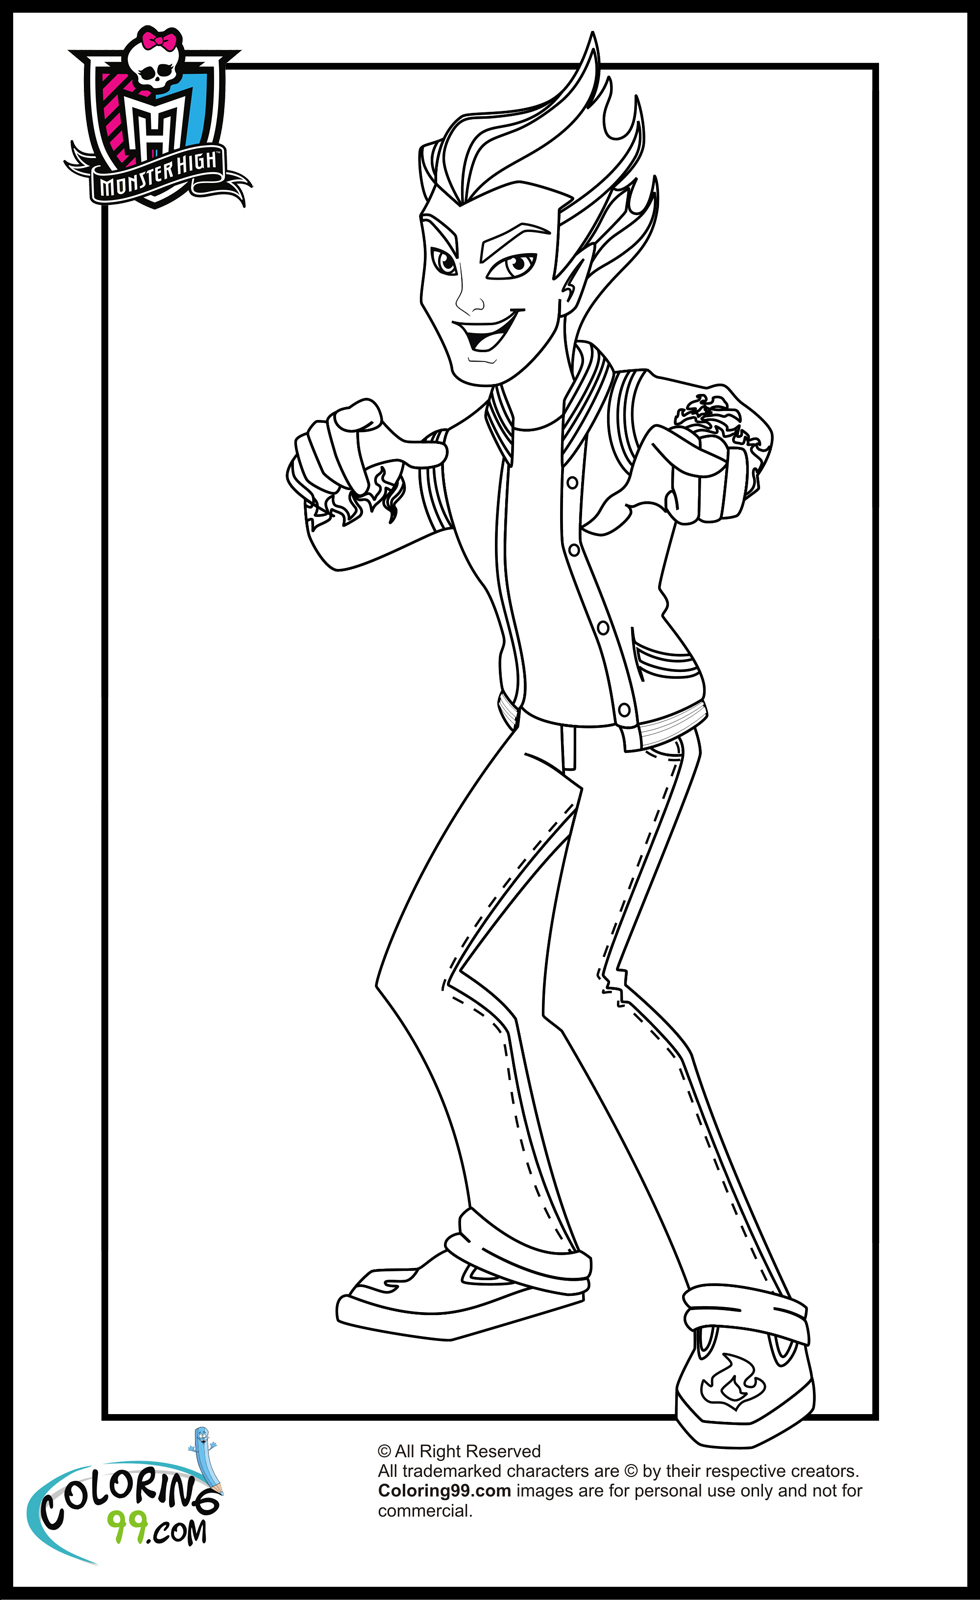 Download Monster High Boys Coloring Pages | Minister Coloring